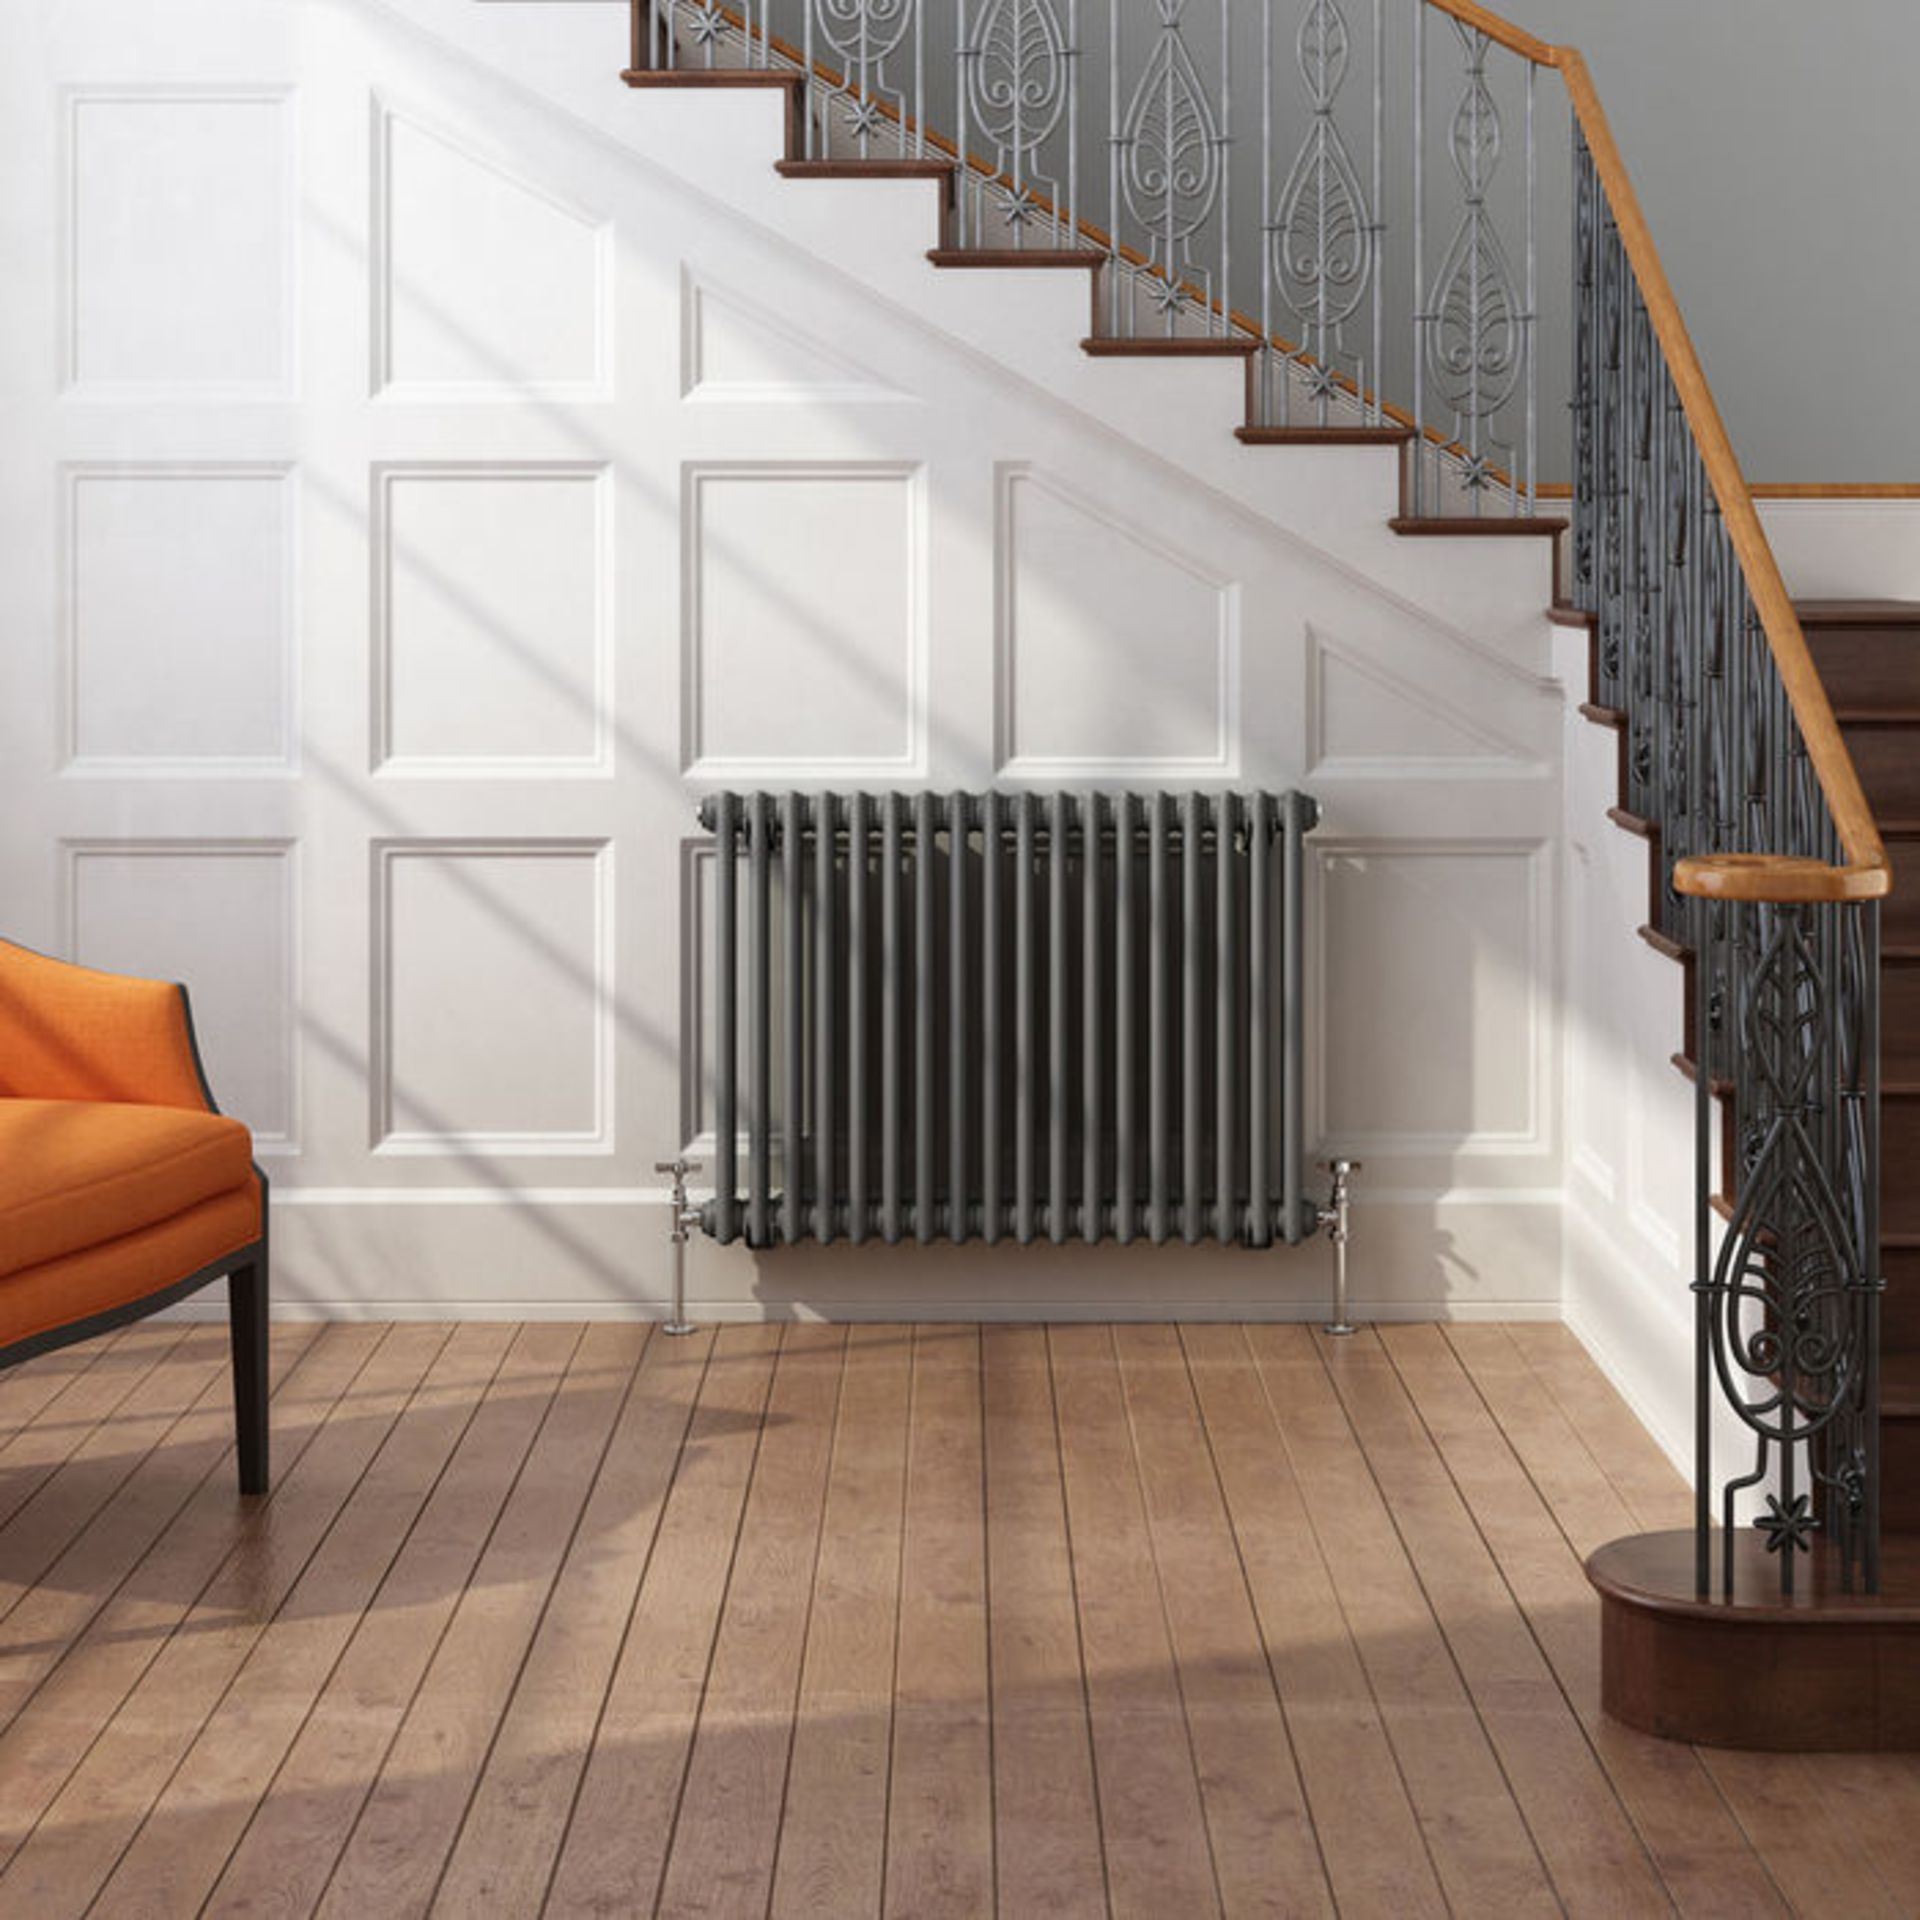 (OS115) 600x828mm Anthracite Double Panel Horizontal Colosseum Traditional Radiator. RRP £439.99. - Image 3 of 4